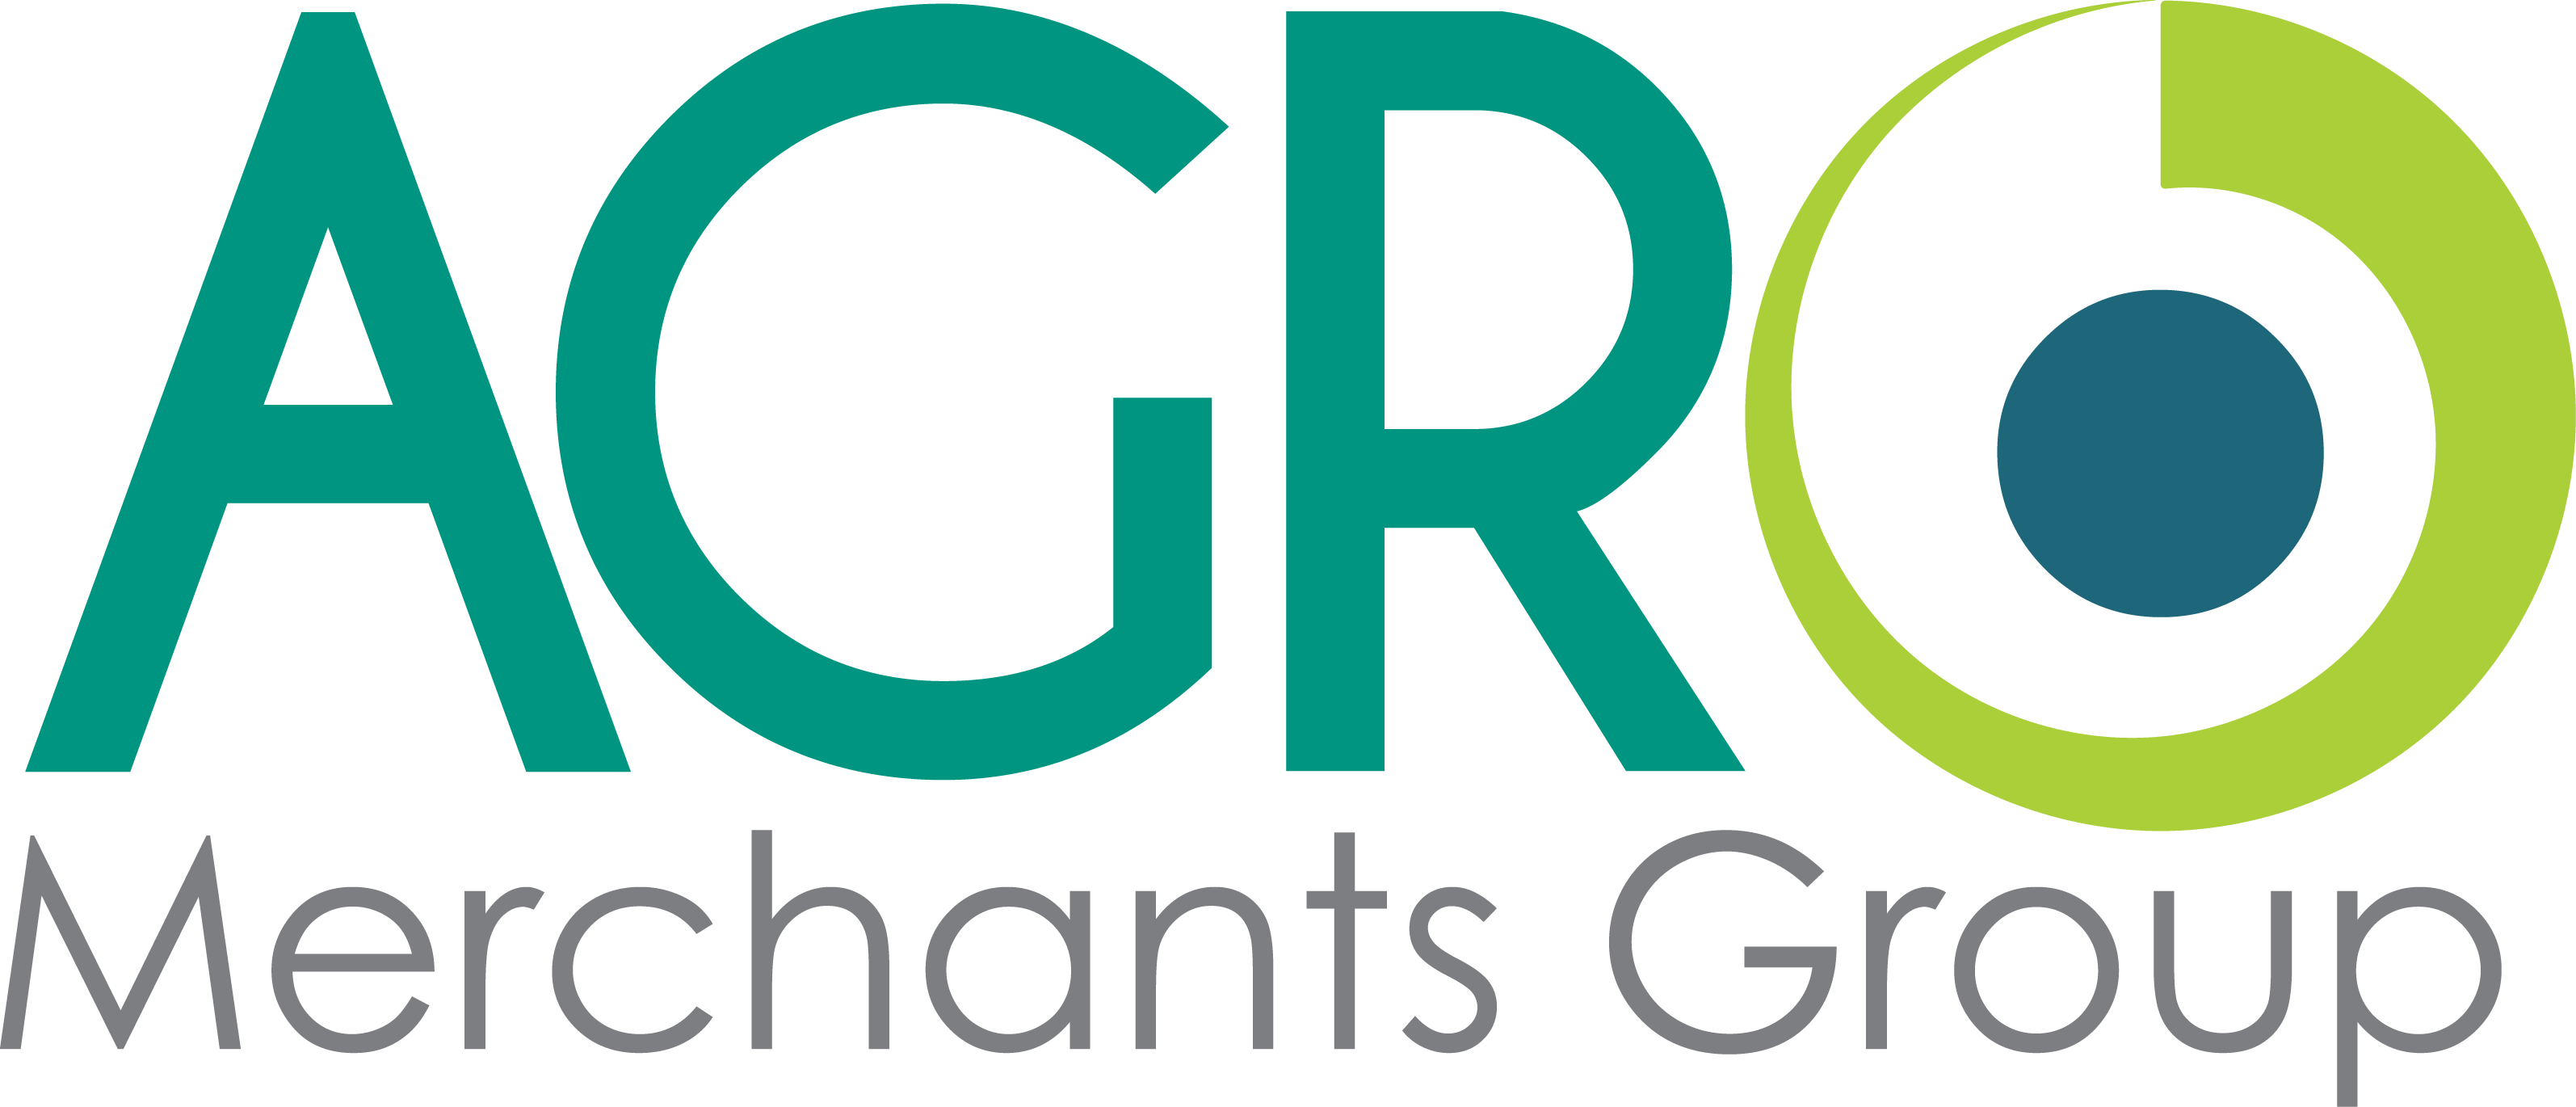 AGRO Merchants Group Acquires Grocontinental and Completes Global